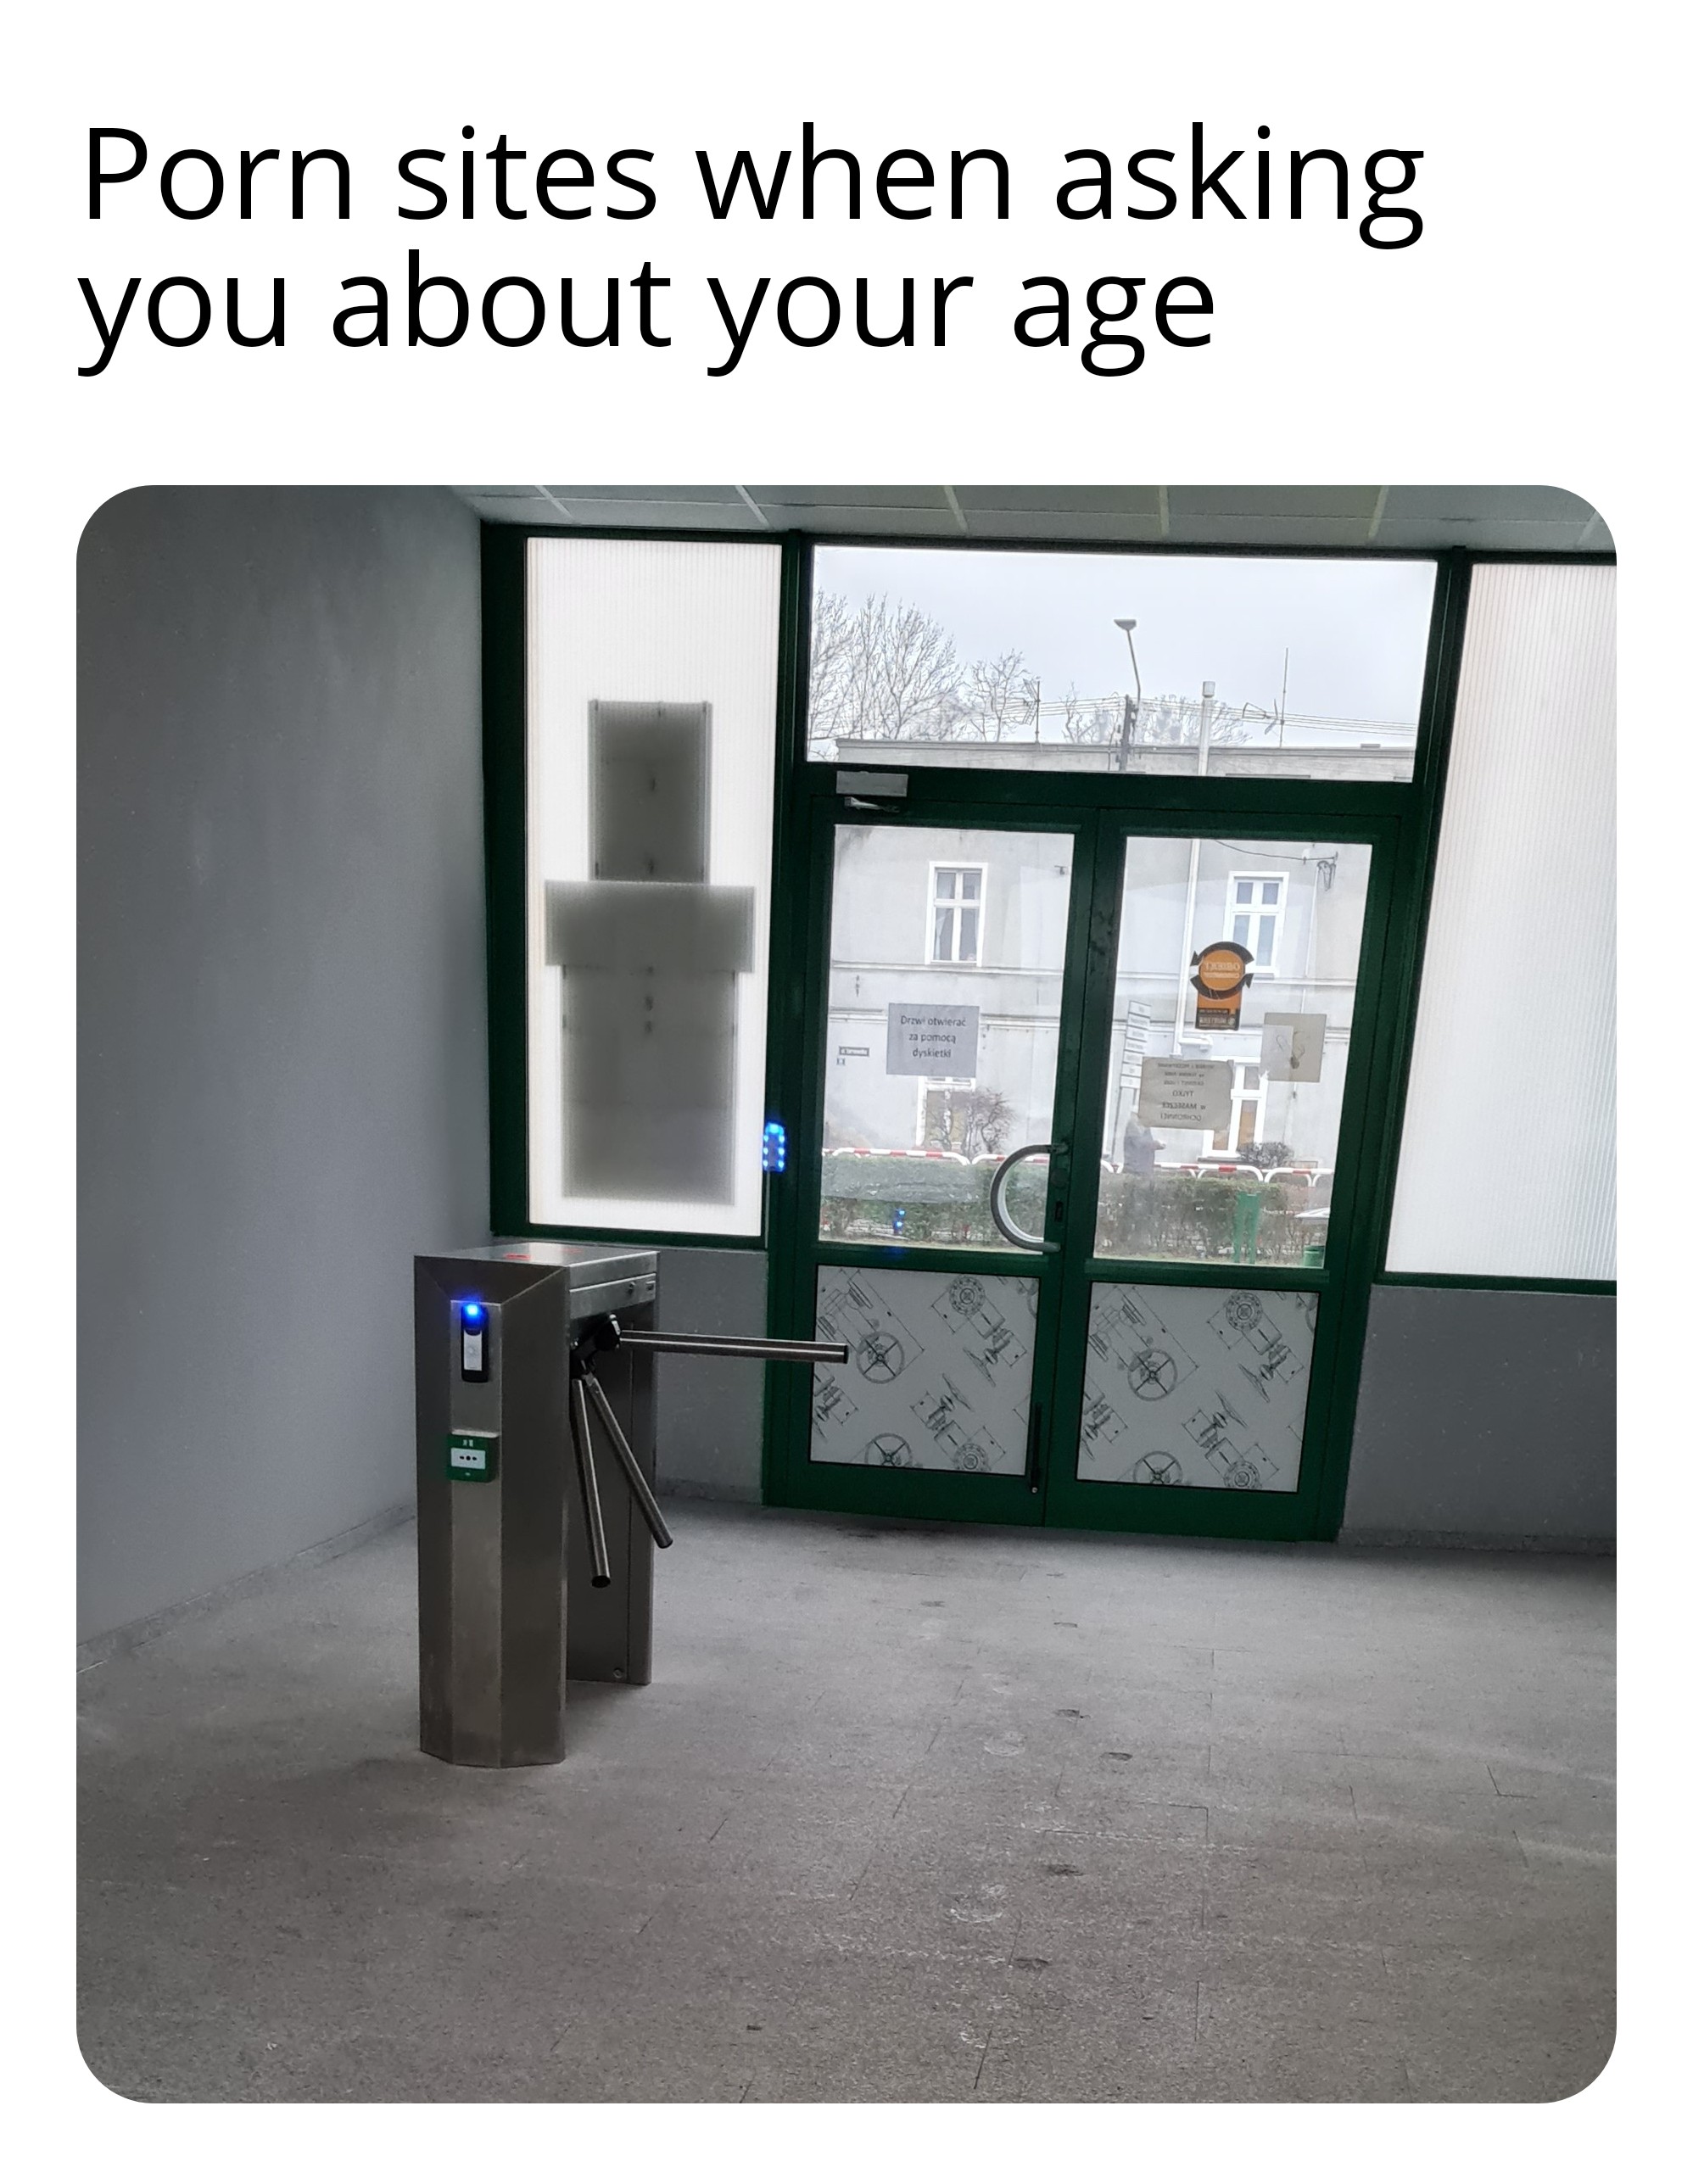 funny gaming memes - glass - Porn sites when asking you about your age